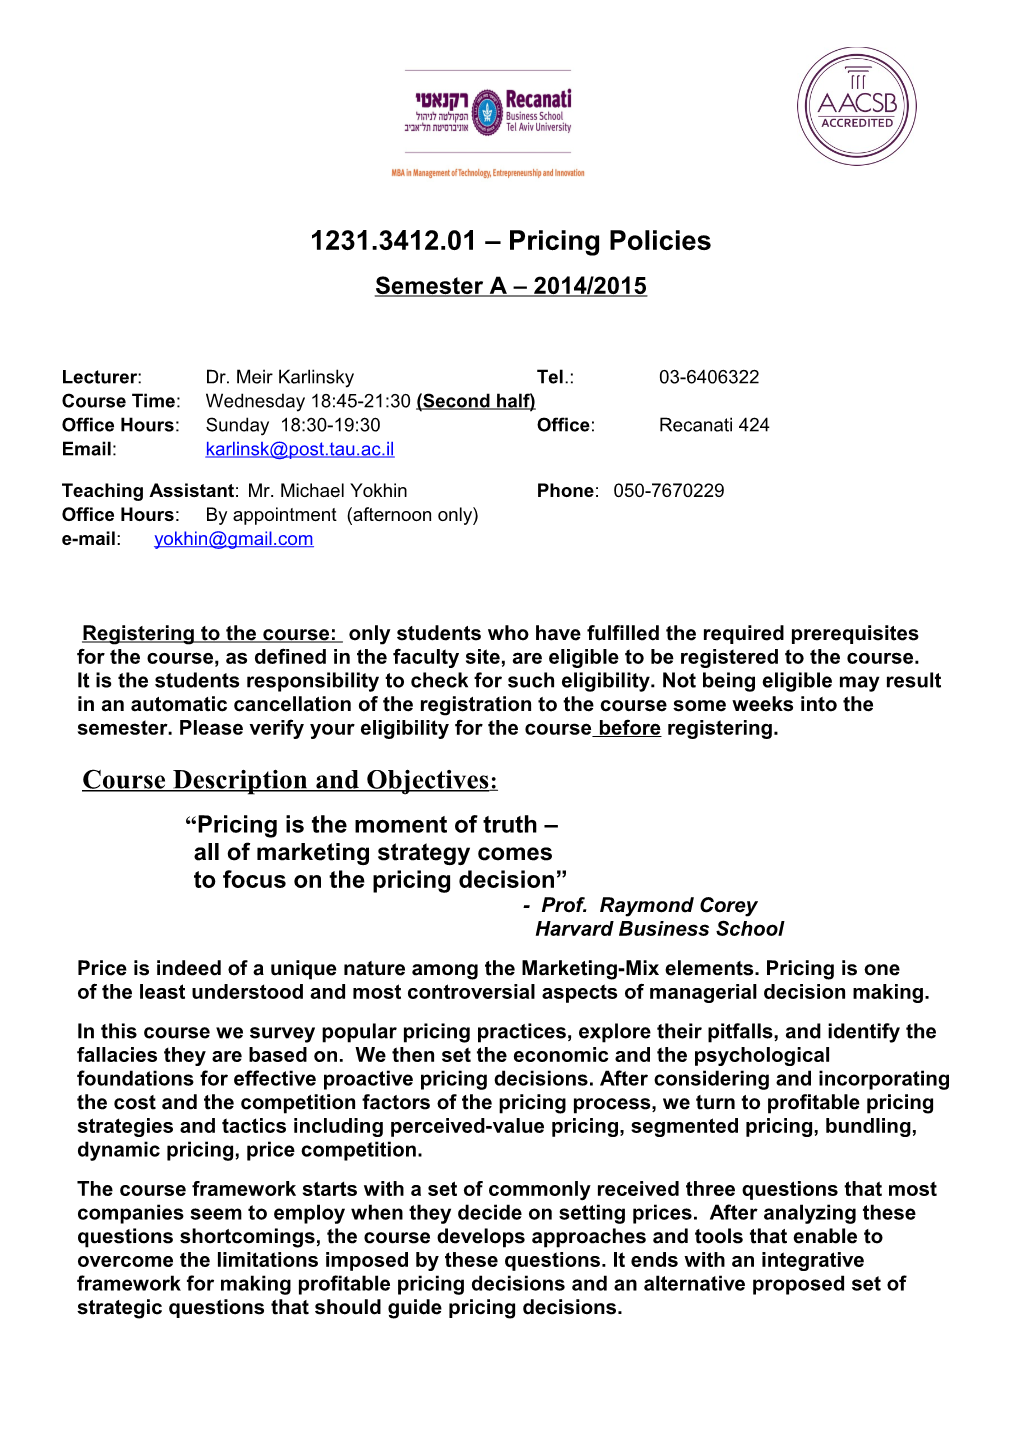 1231.3412.01 Pricing Policies